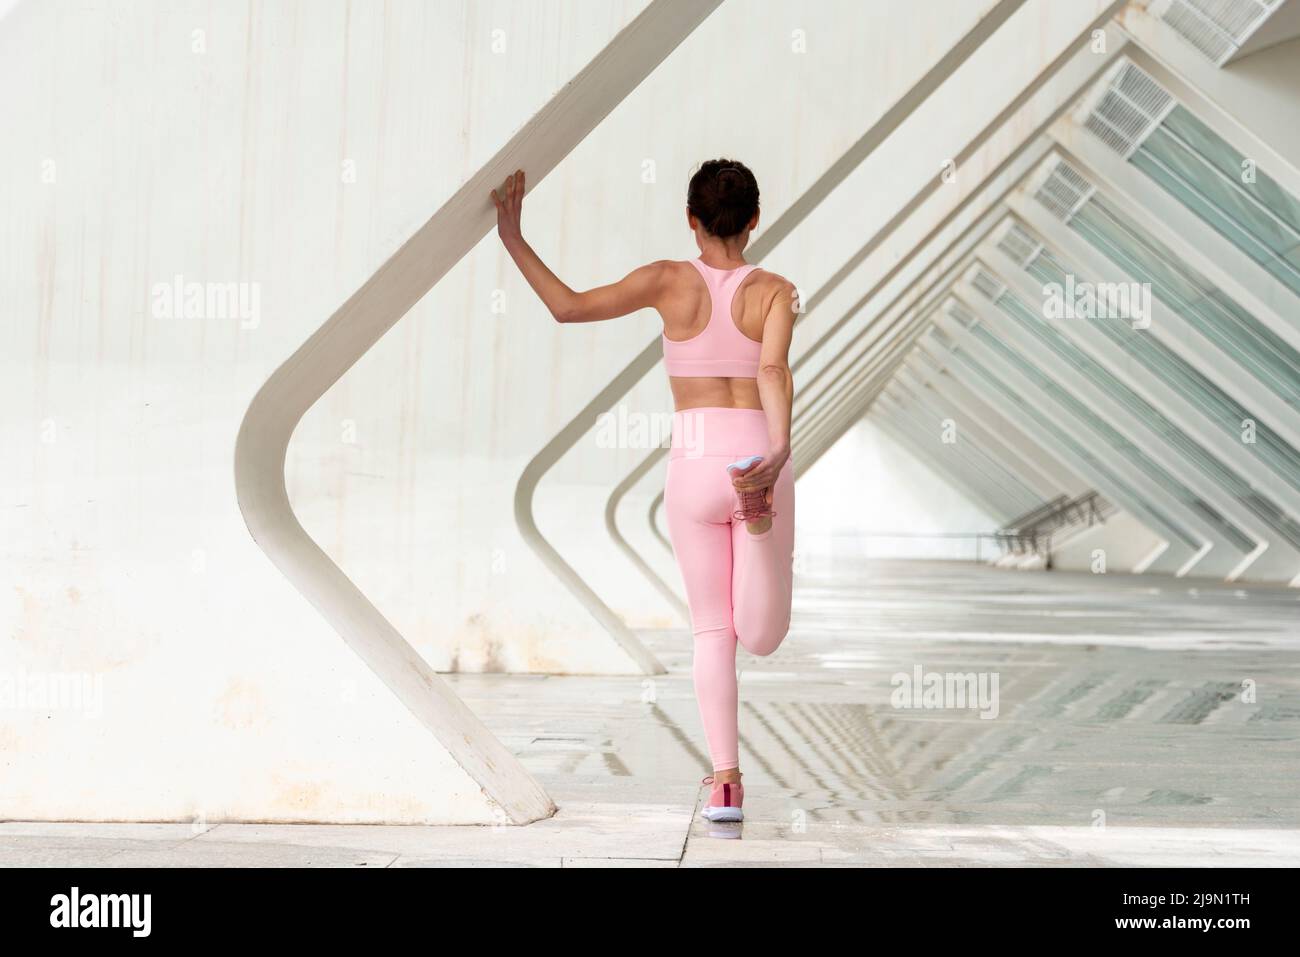 rear view of a sporty woman doing a leg stretch warm up exercise before running, urban background. Stock Photo